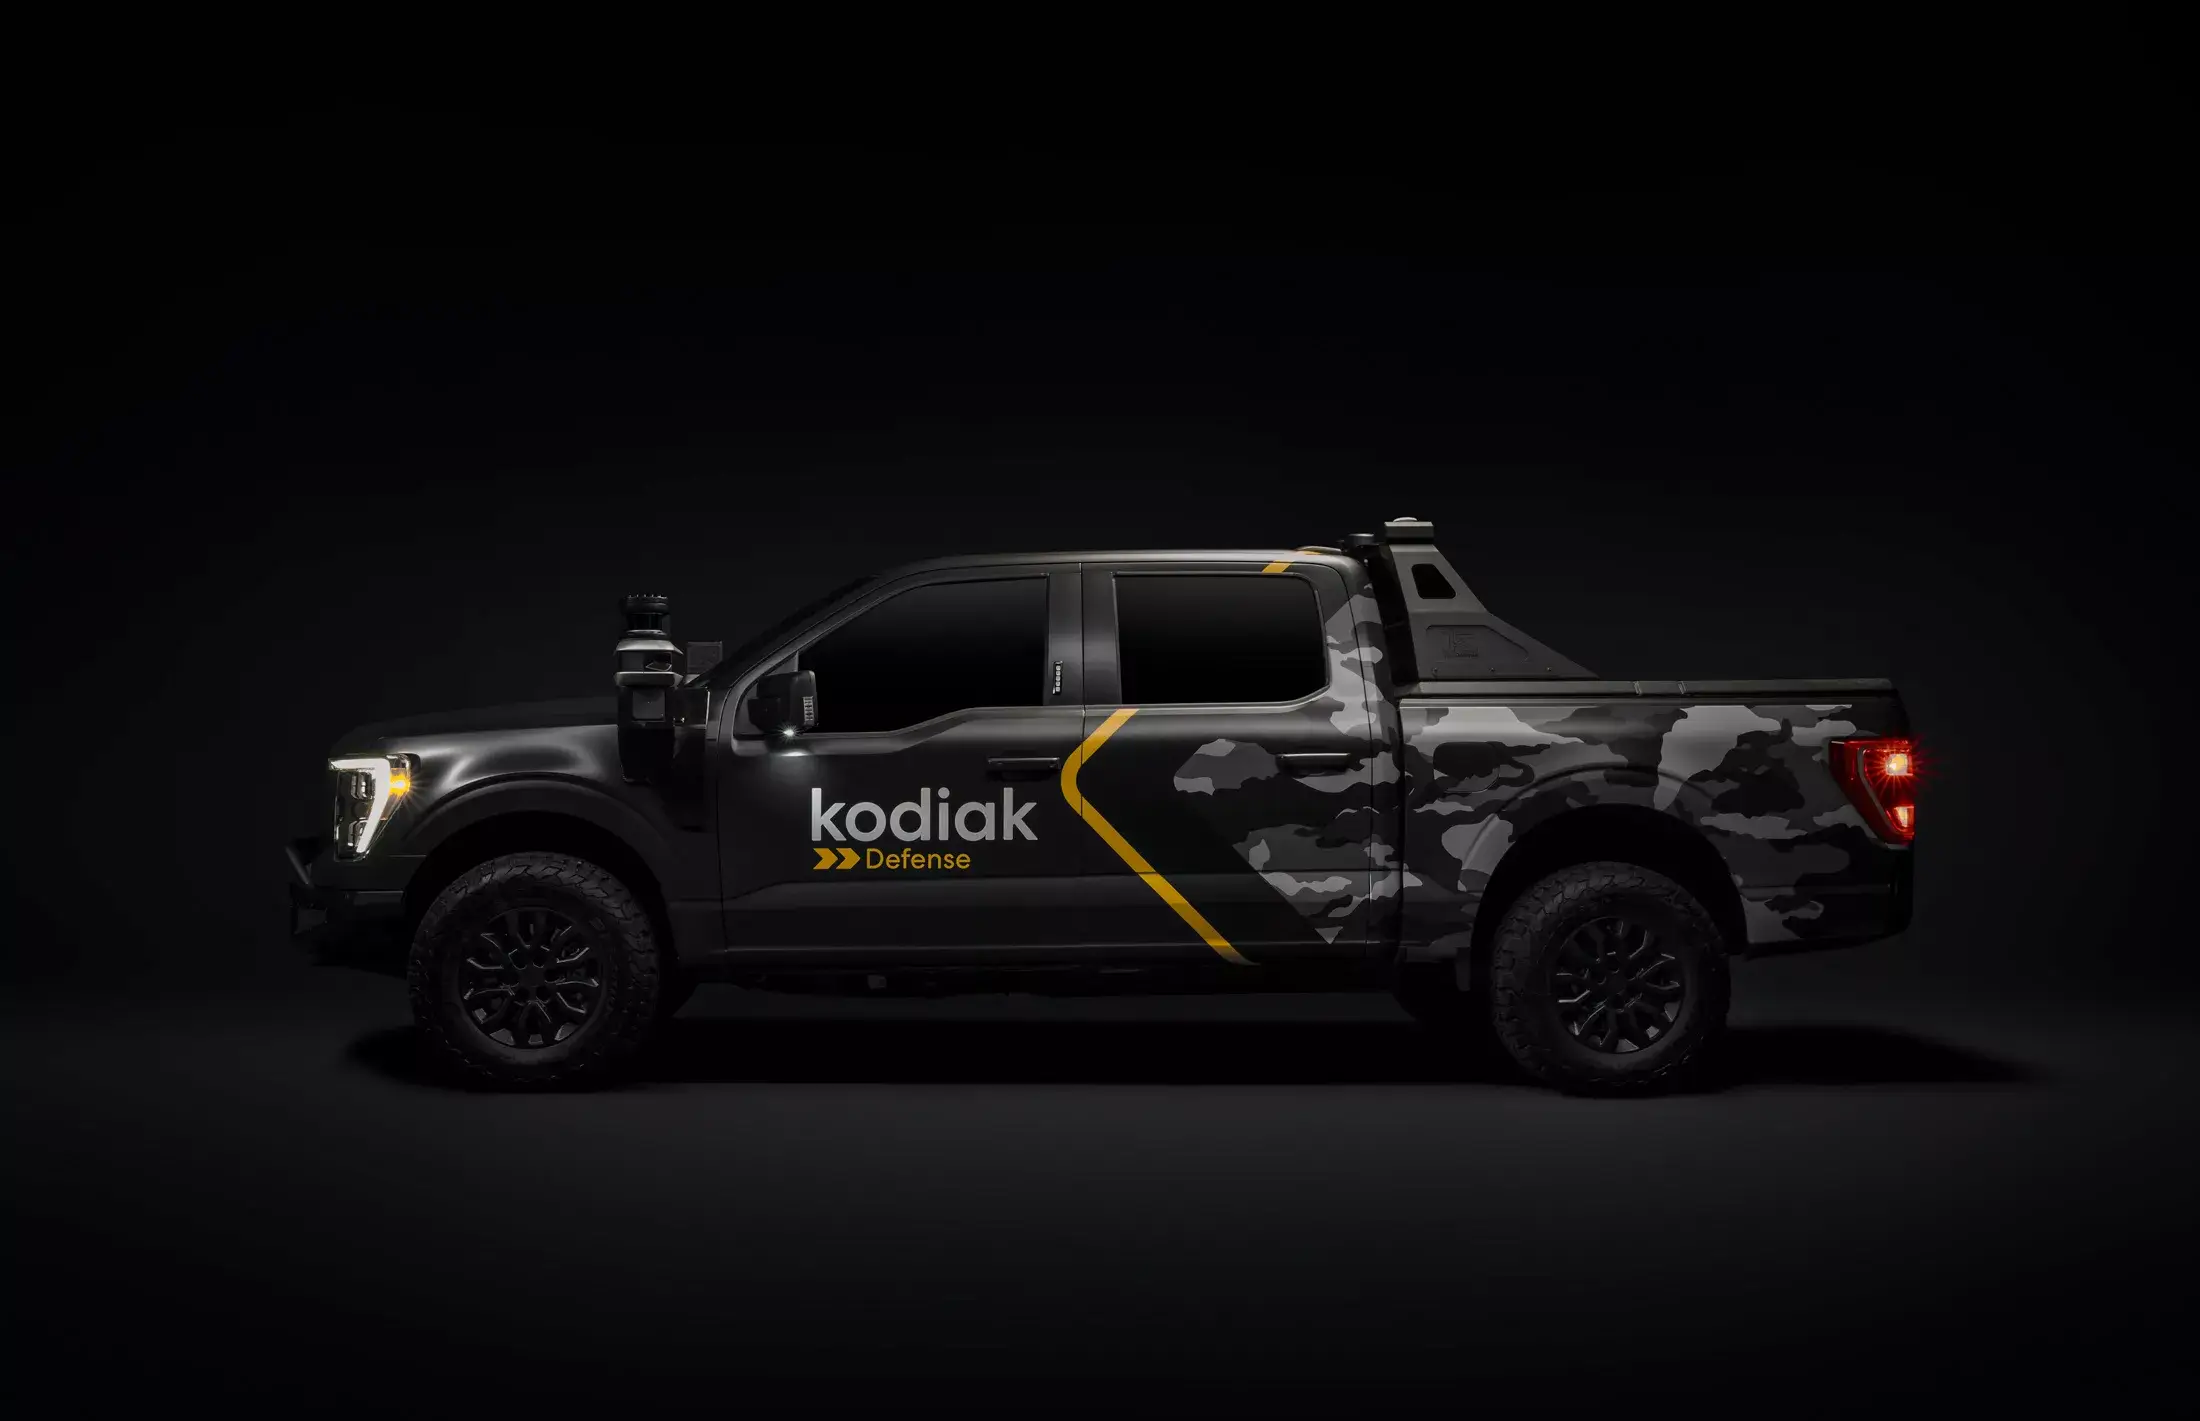 The Kodiak unmanned all-terrain vehicle was made from a Ford F-150 pickup truck for the Pentagon.